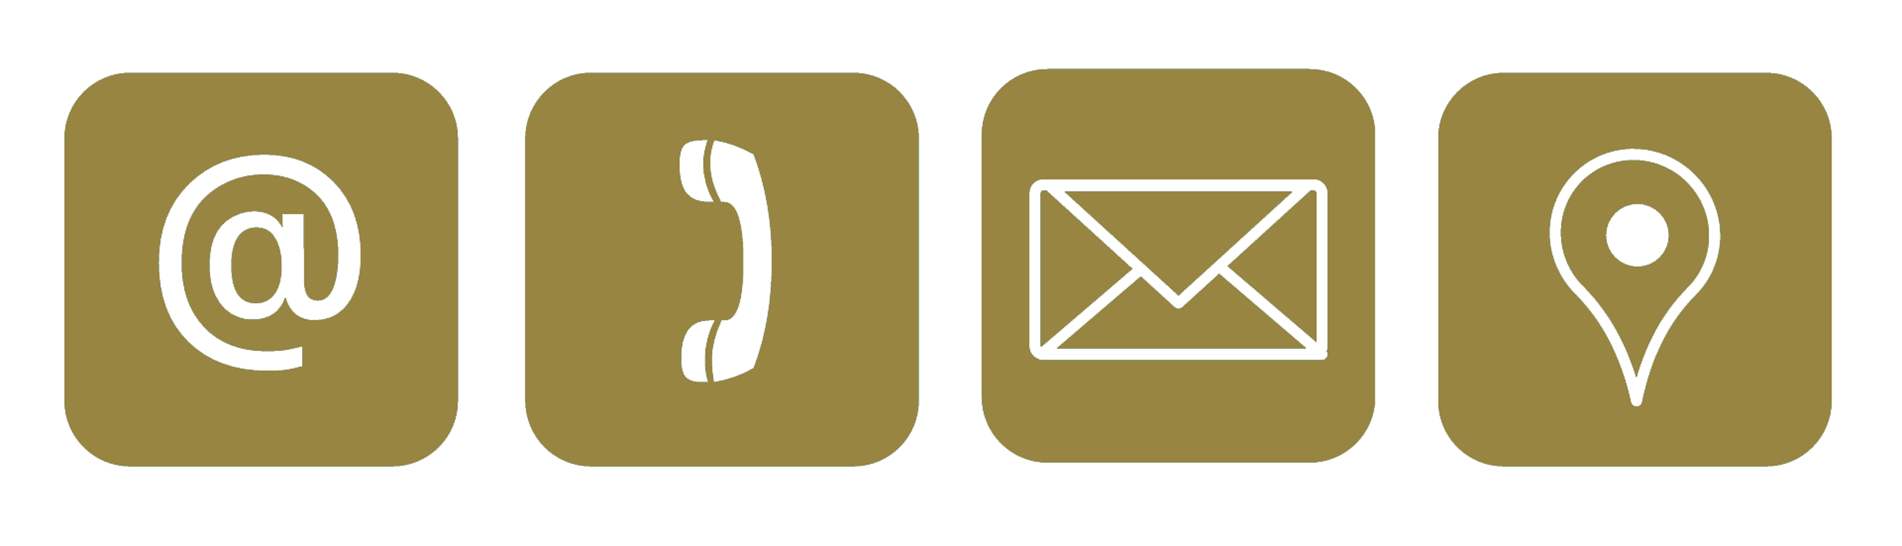 Email, phone, mail, and location icons in a row